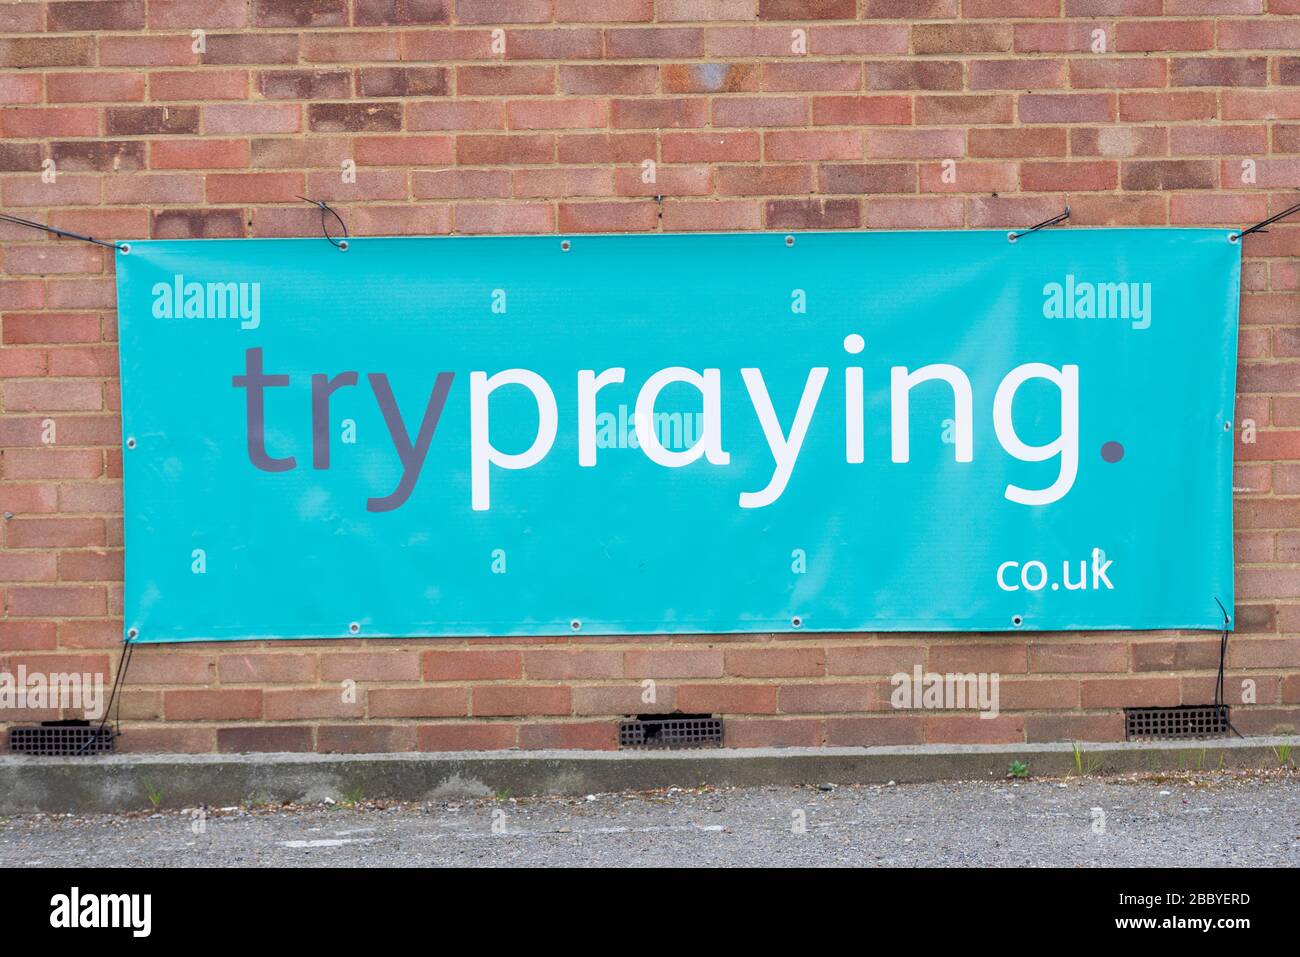 Try praying banner outside a church during COVID-19 Coronavirus outbreak lockdown period. Turn to God. Trypraying is for those who are not religious Stock Photo